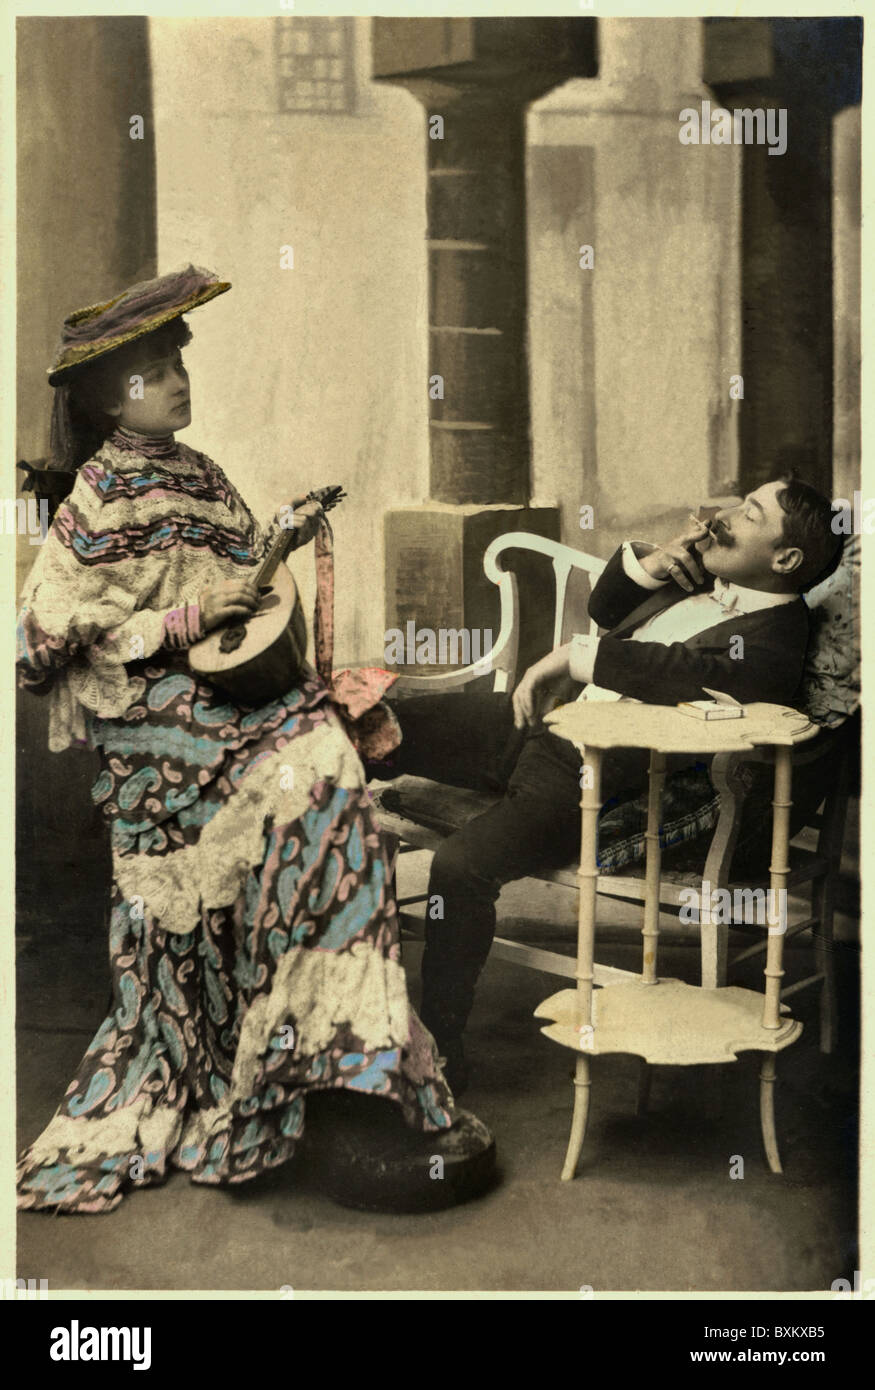 tobacco / smoking, cigarettes, man smoking and relaxing on a bench while his wife is playing a mandolin, Portugal, 1907, Additional-Rights-Clearences-Not Available Stock Photo